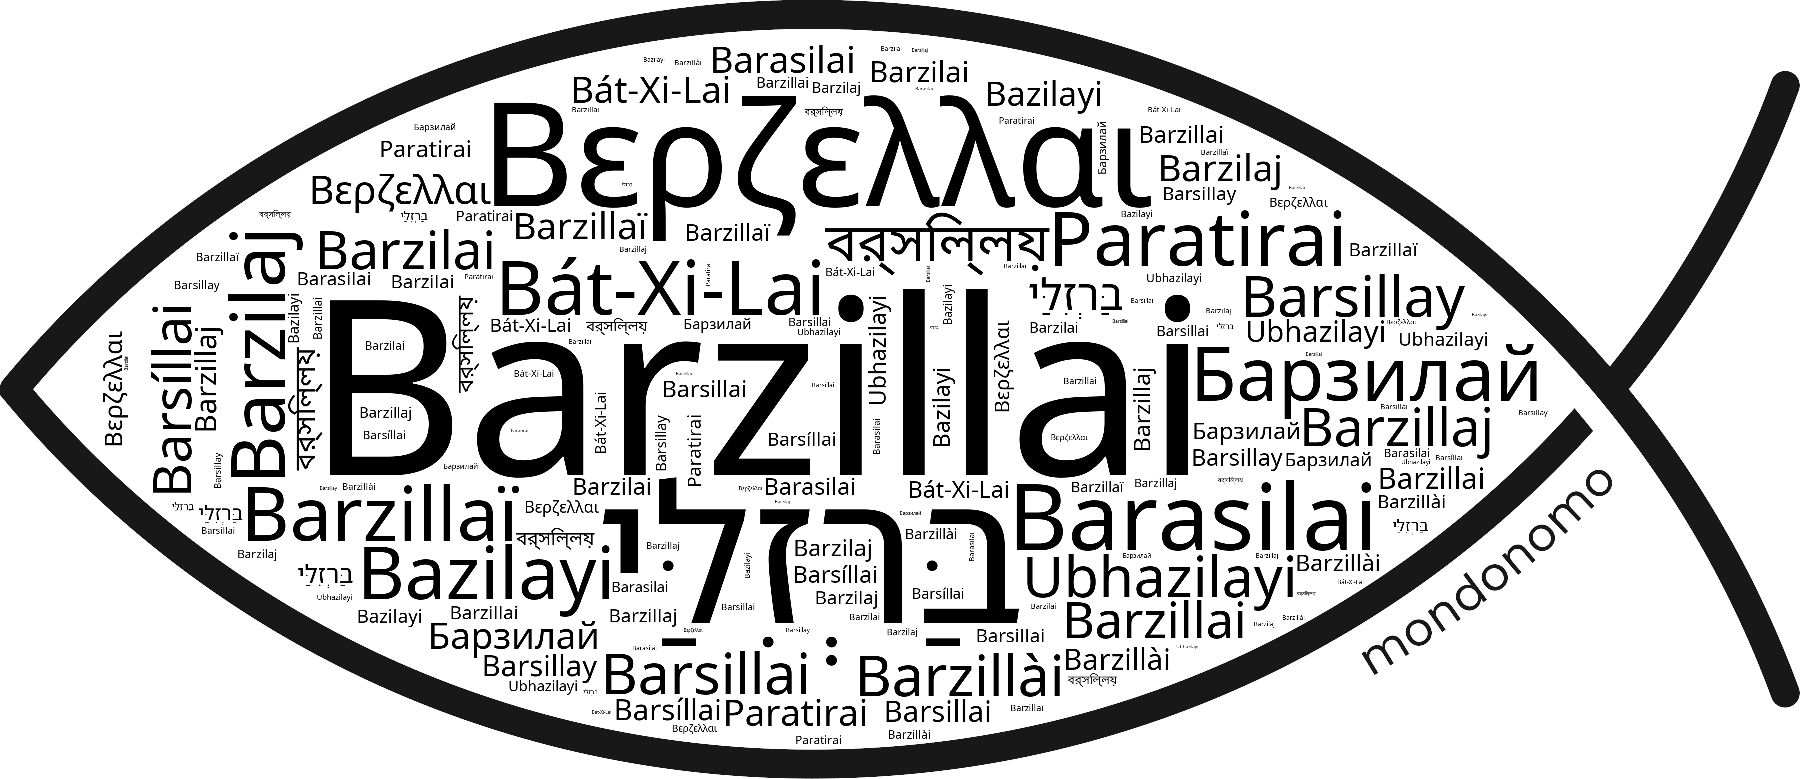 Name Barzillai in the world's Bibles